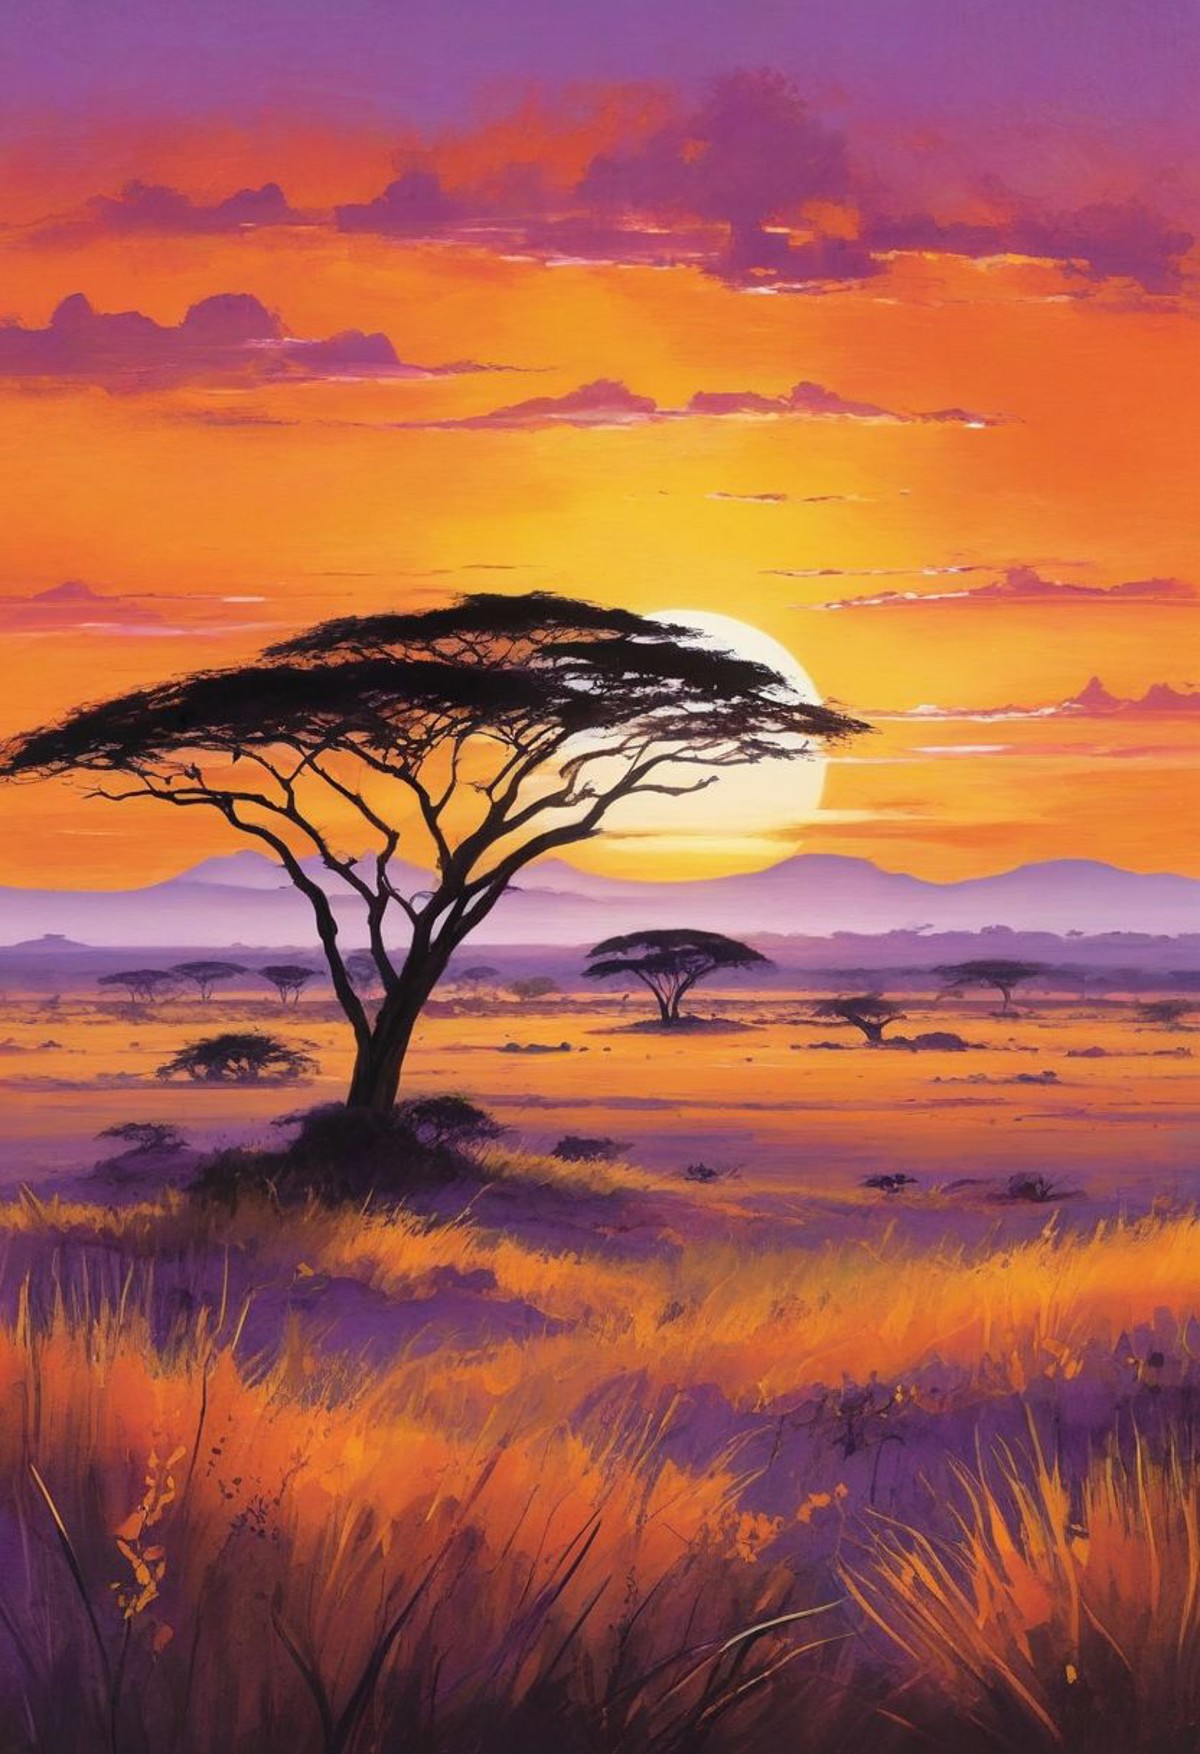 Create an illustration of the African savanna in all its glory, bathed in the warm hues of the setting sun, with the horiz...